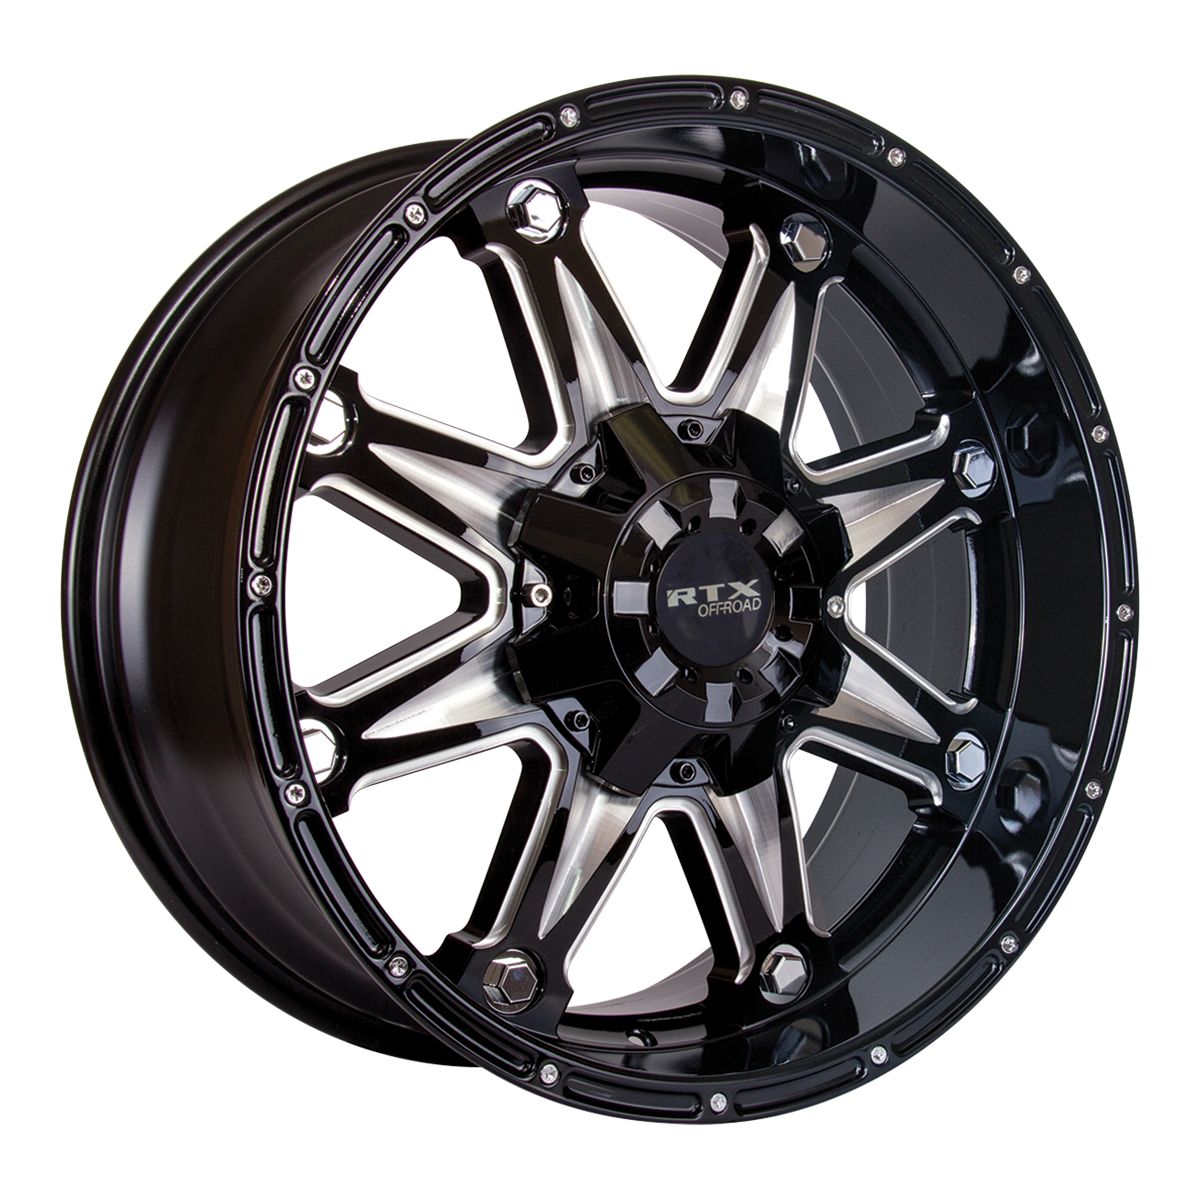 Spine • Black with Milled Spokes • 17x9 6x135/139.7 ET10 CB87.1